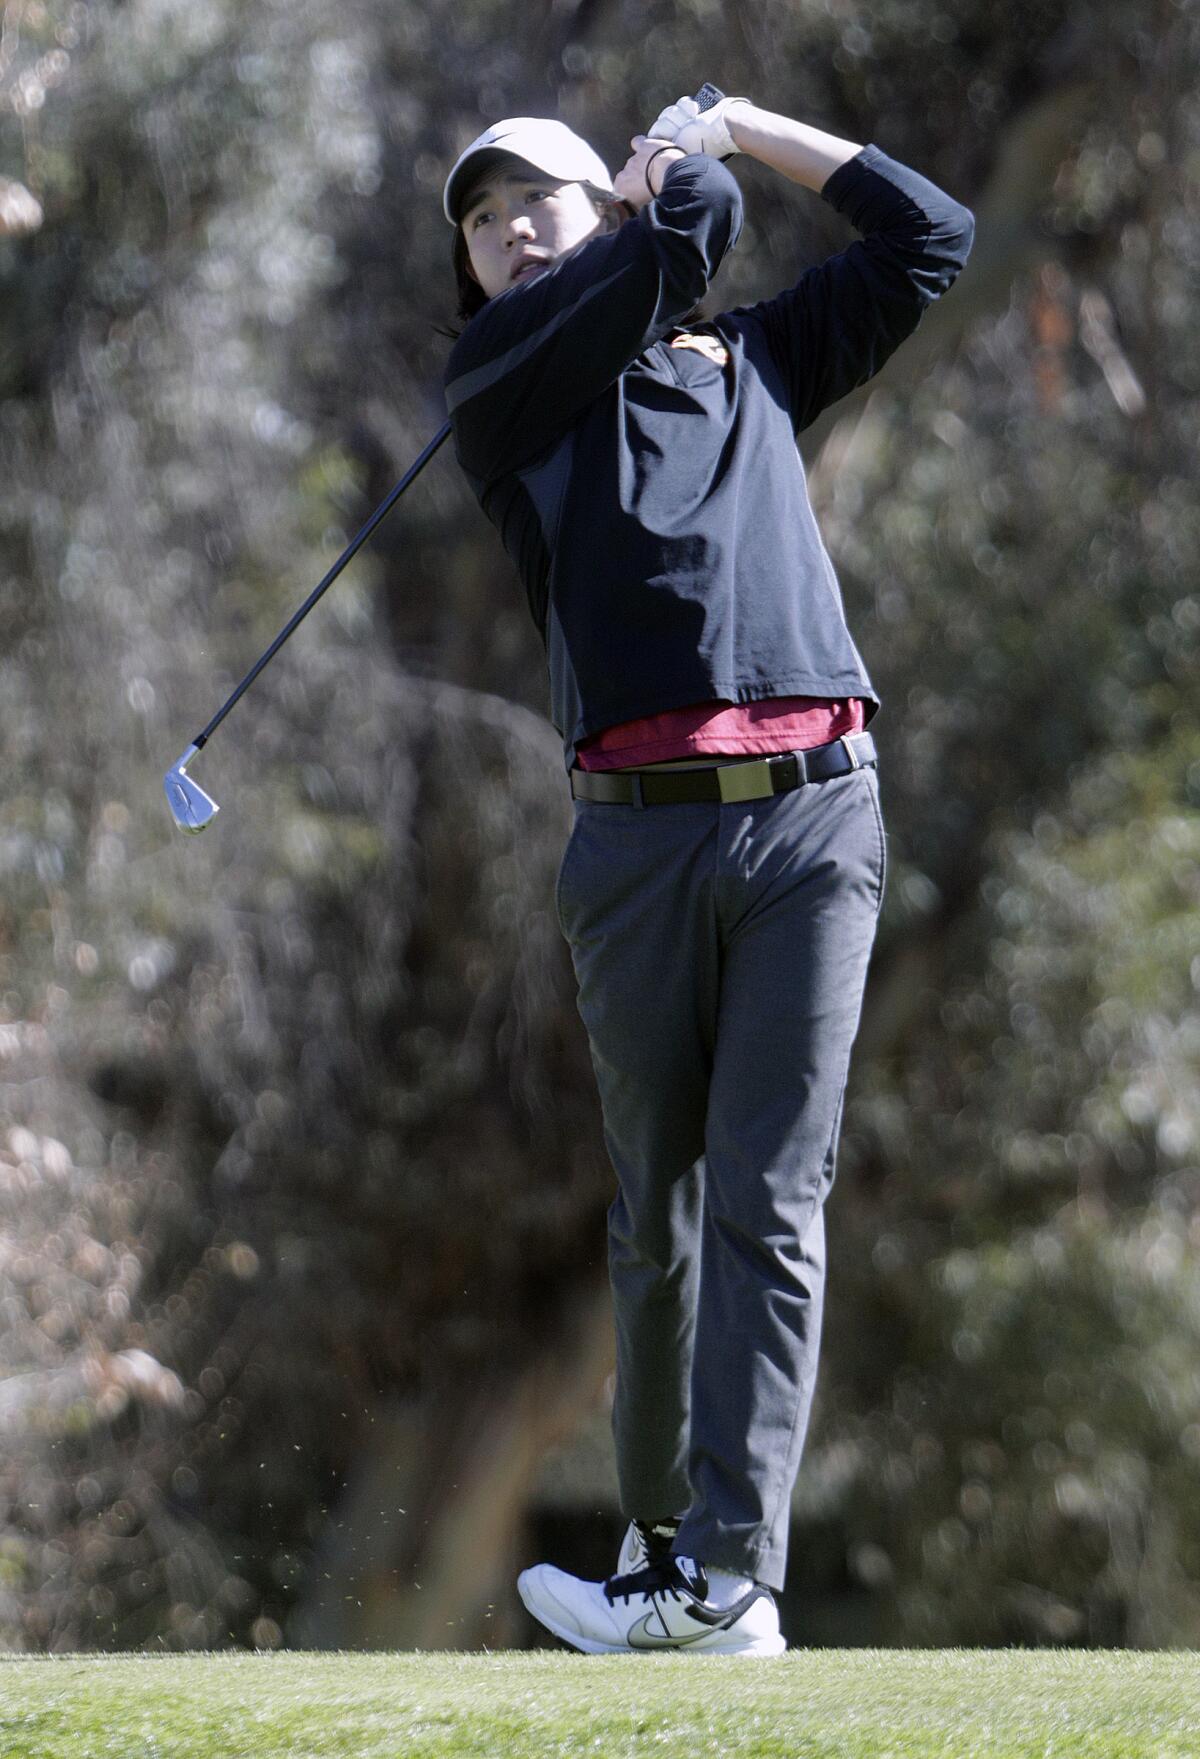 GCC's Justin Del Rosario tees off on the sixteenth in the Glendale College Invitational at Oakmont Country Club in Glendale on Monday, February 10, 2020. The wind was a factor that changed the game for all the community college teams making scores much higher.